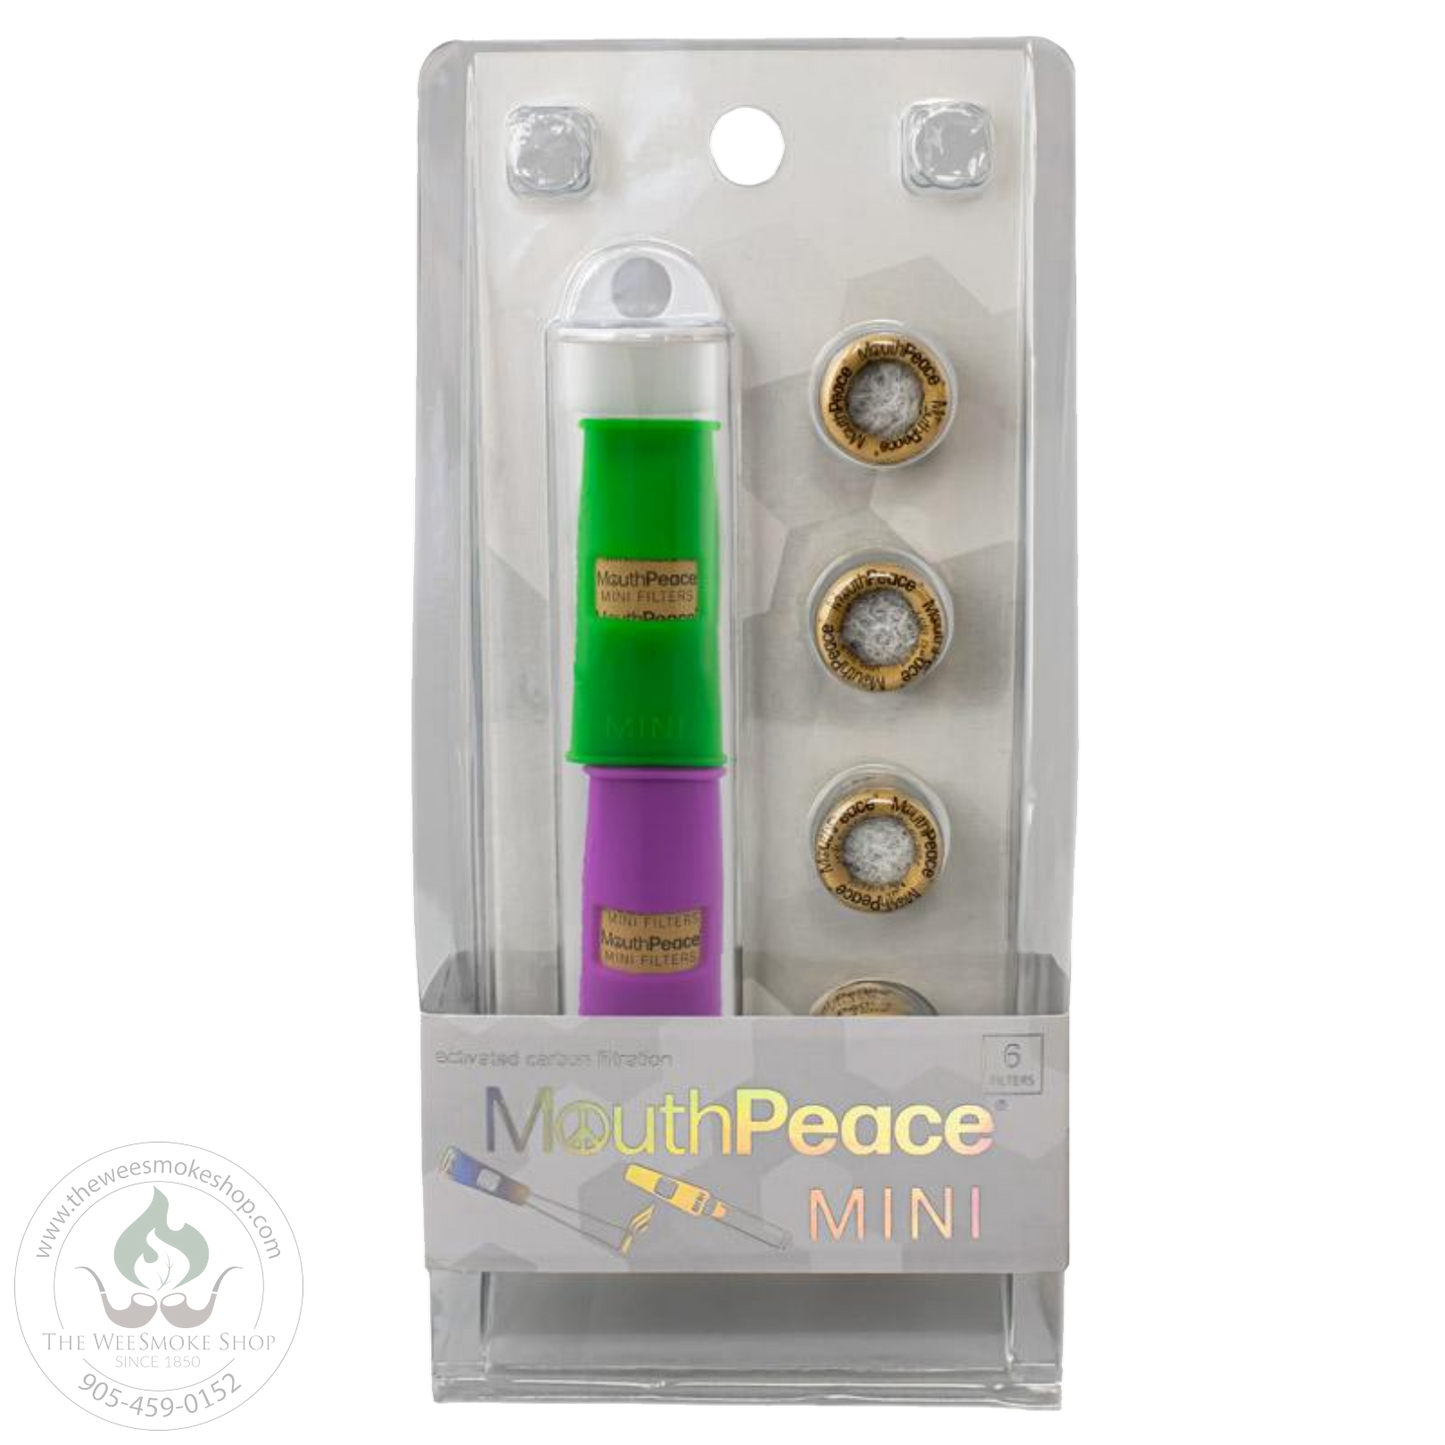 Moose Labs MouthPeace Mini in the color purple and green